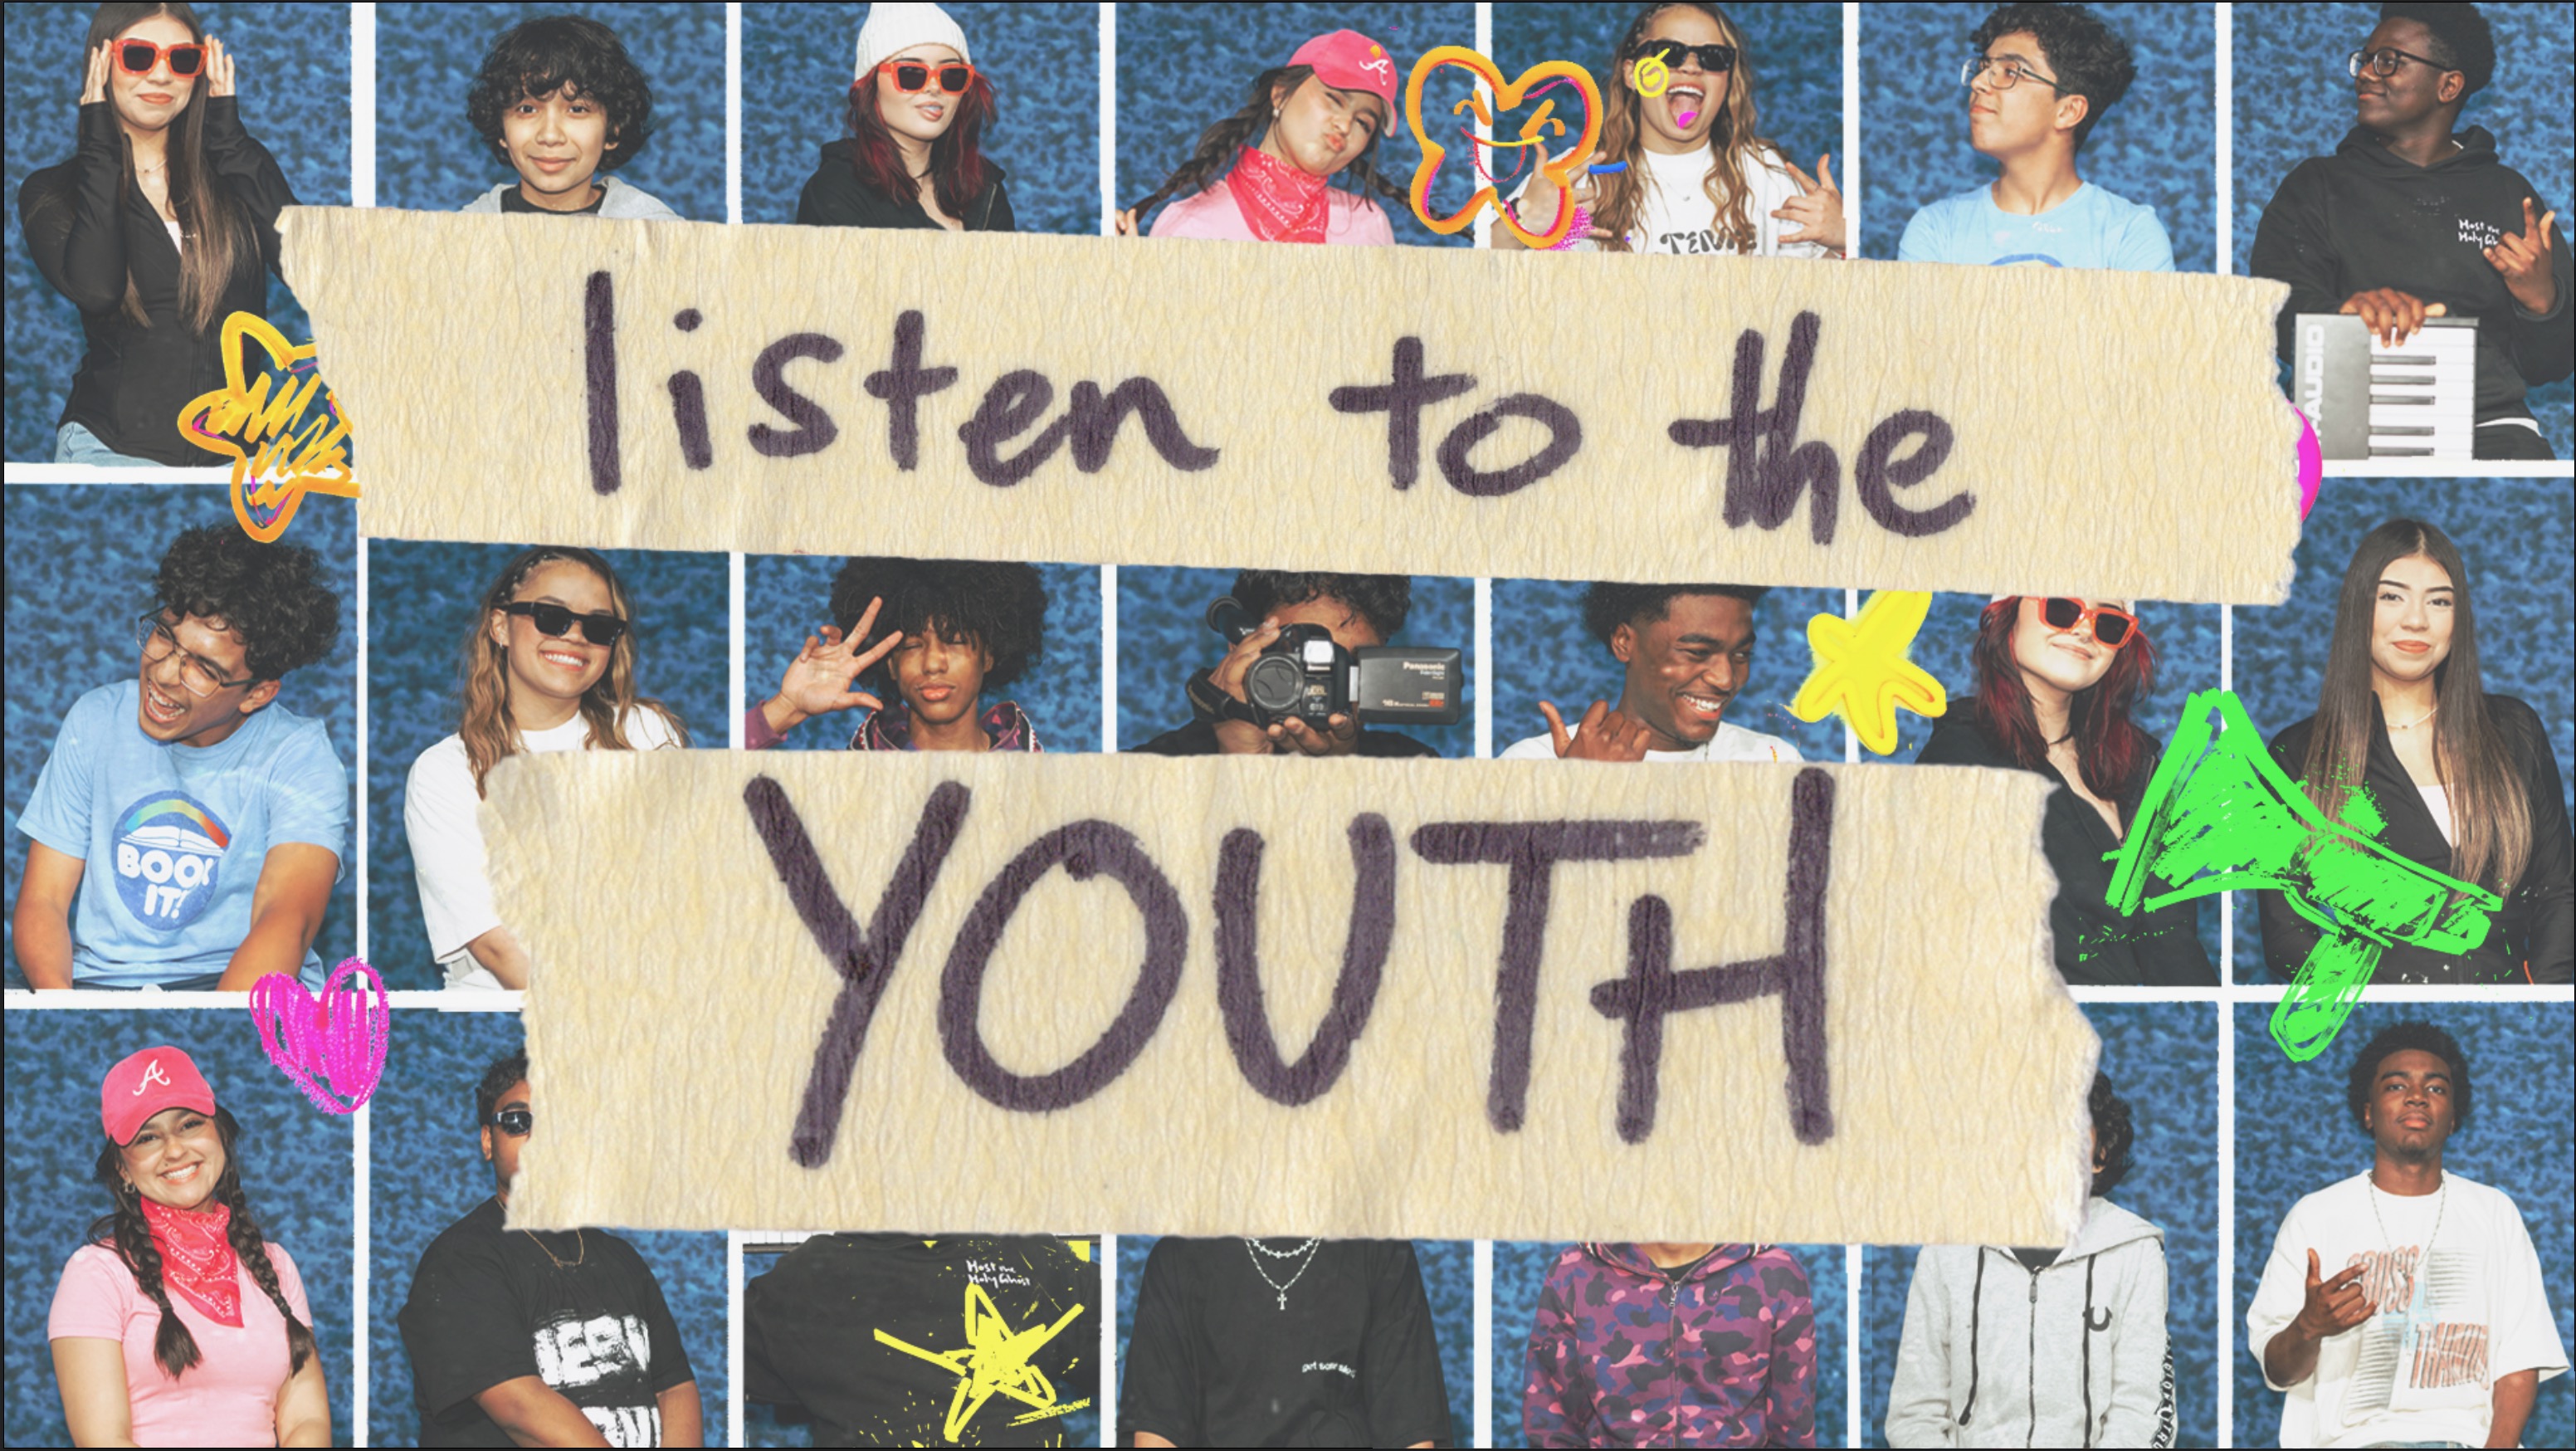 Listen to the Youth- FCY Series  at the Alpharetta campus